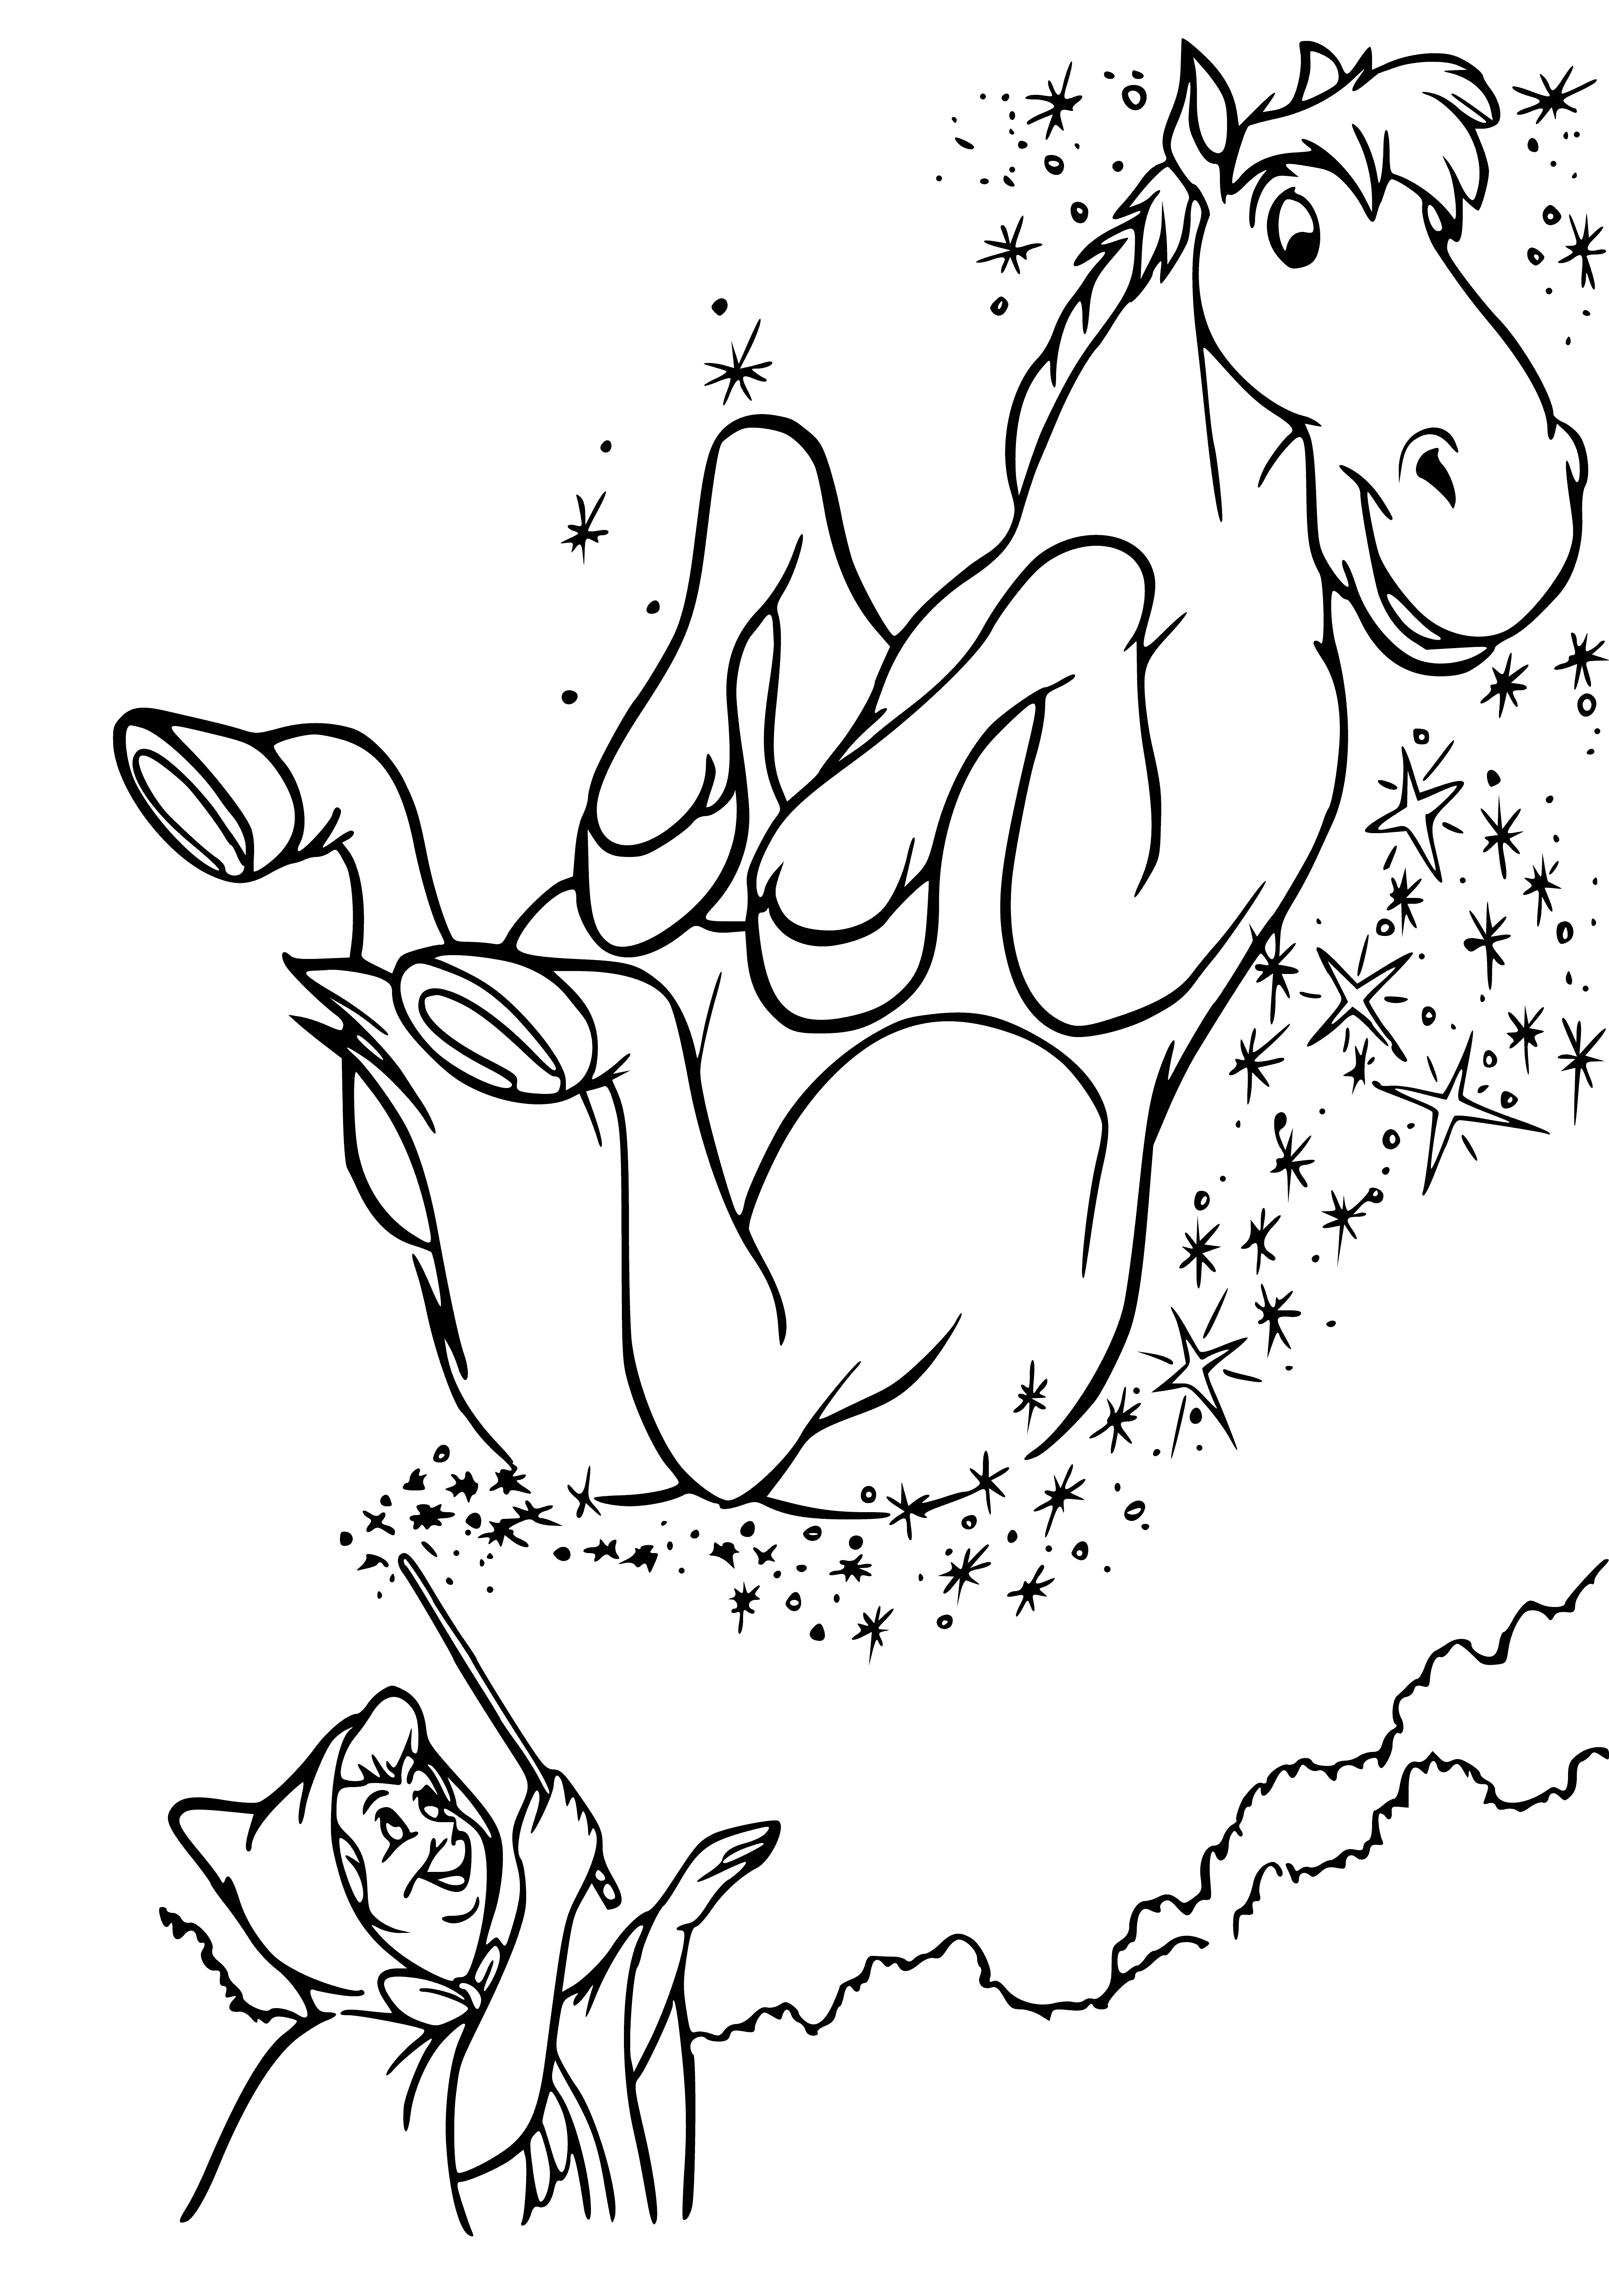 A wave of a stick and a horse ... coloring page